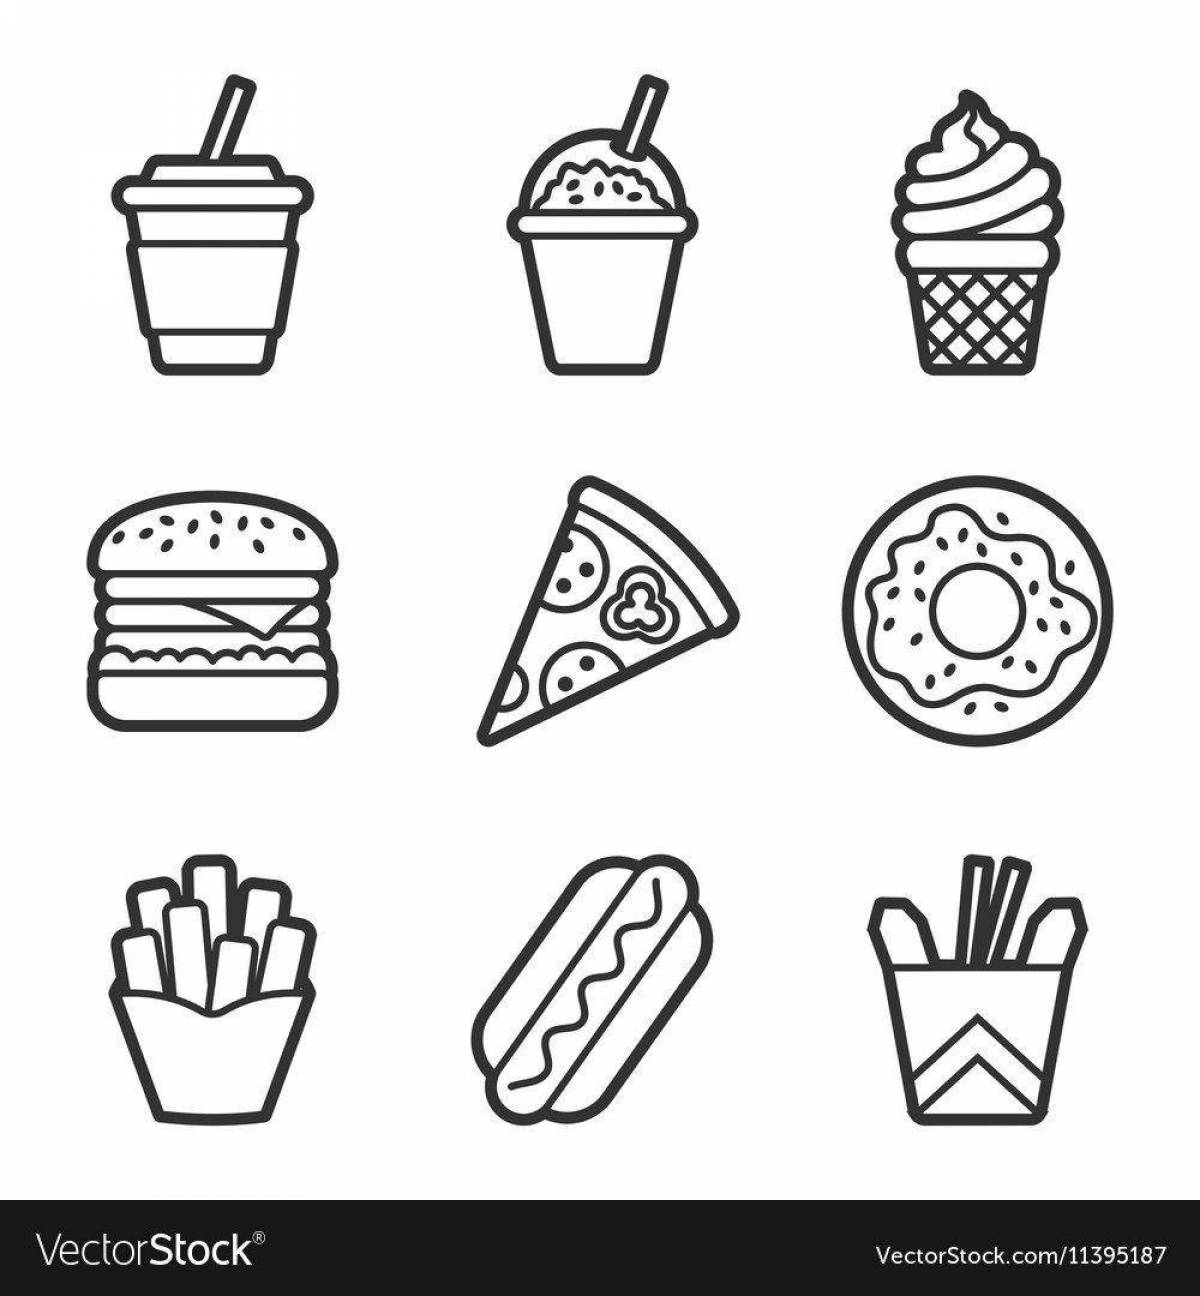 Adorable food stickers coloring book